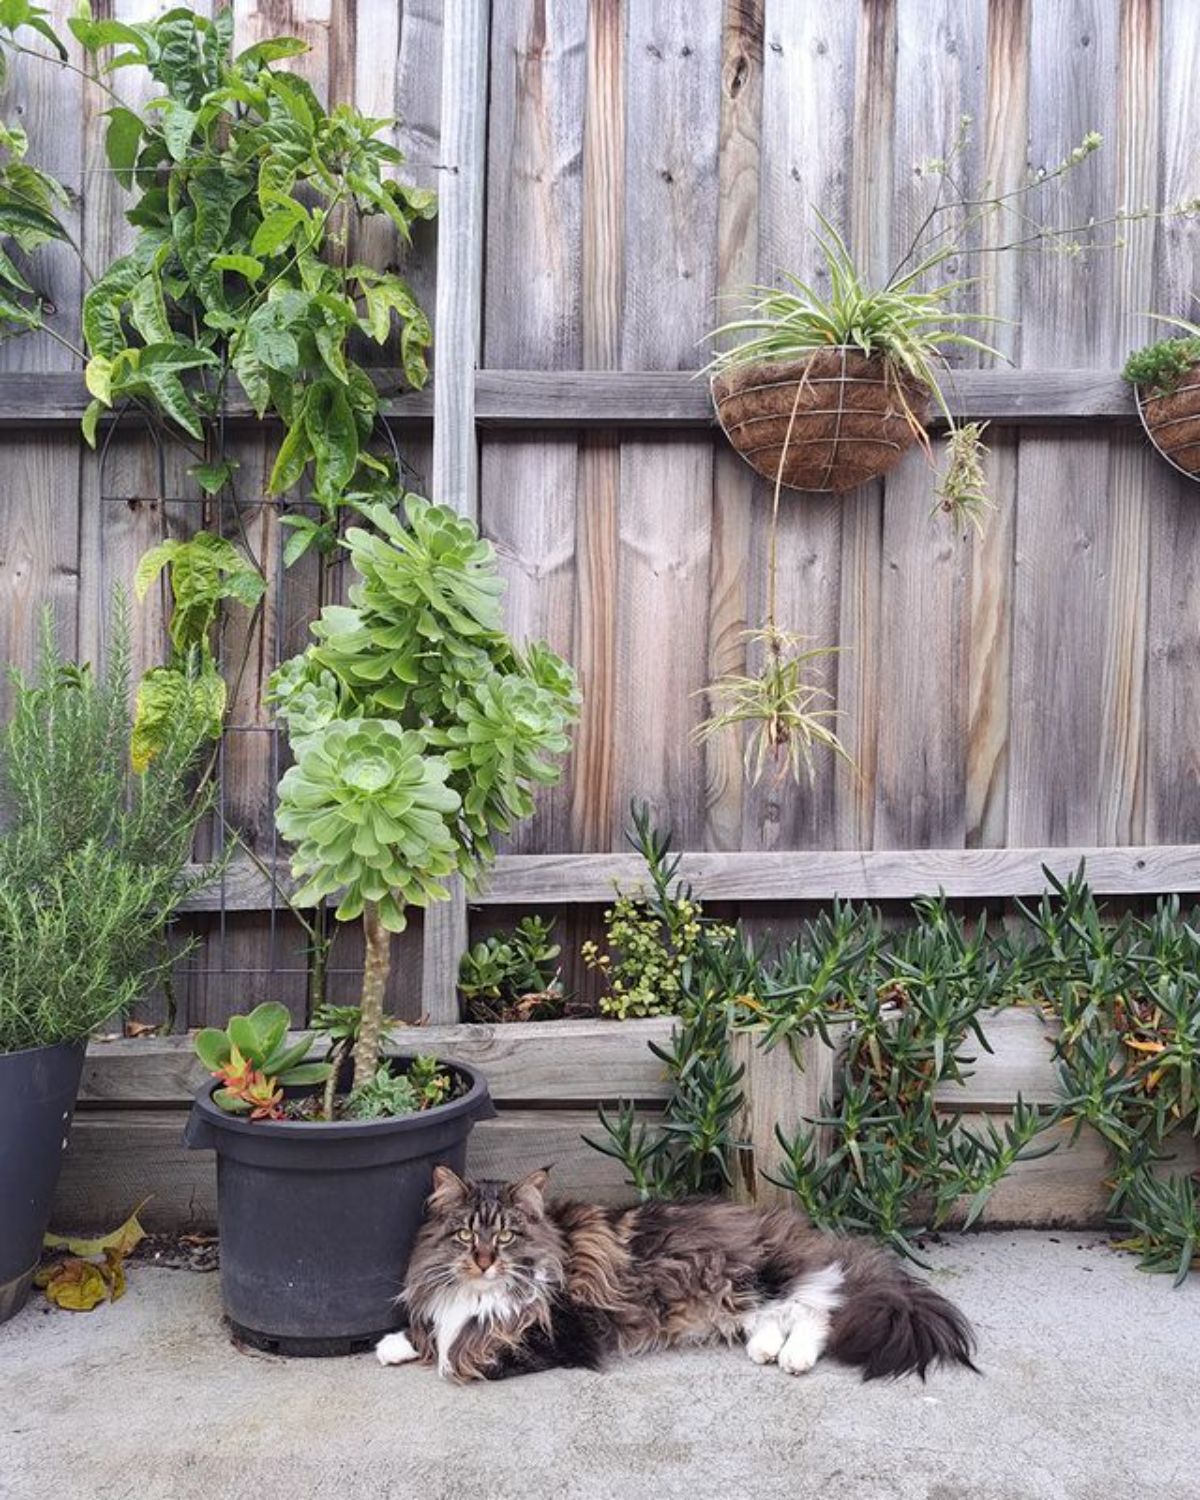 A fluffy brown maine coon lying on a concrete floor next to plants in pots.